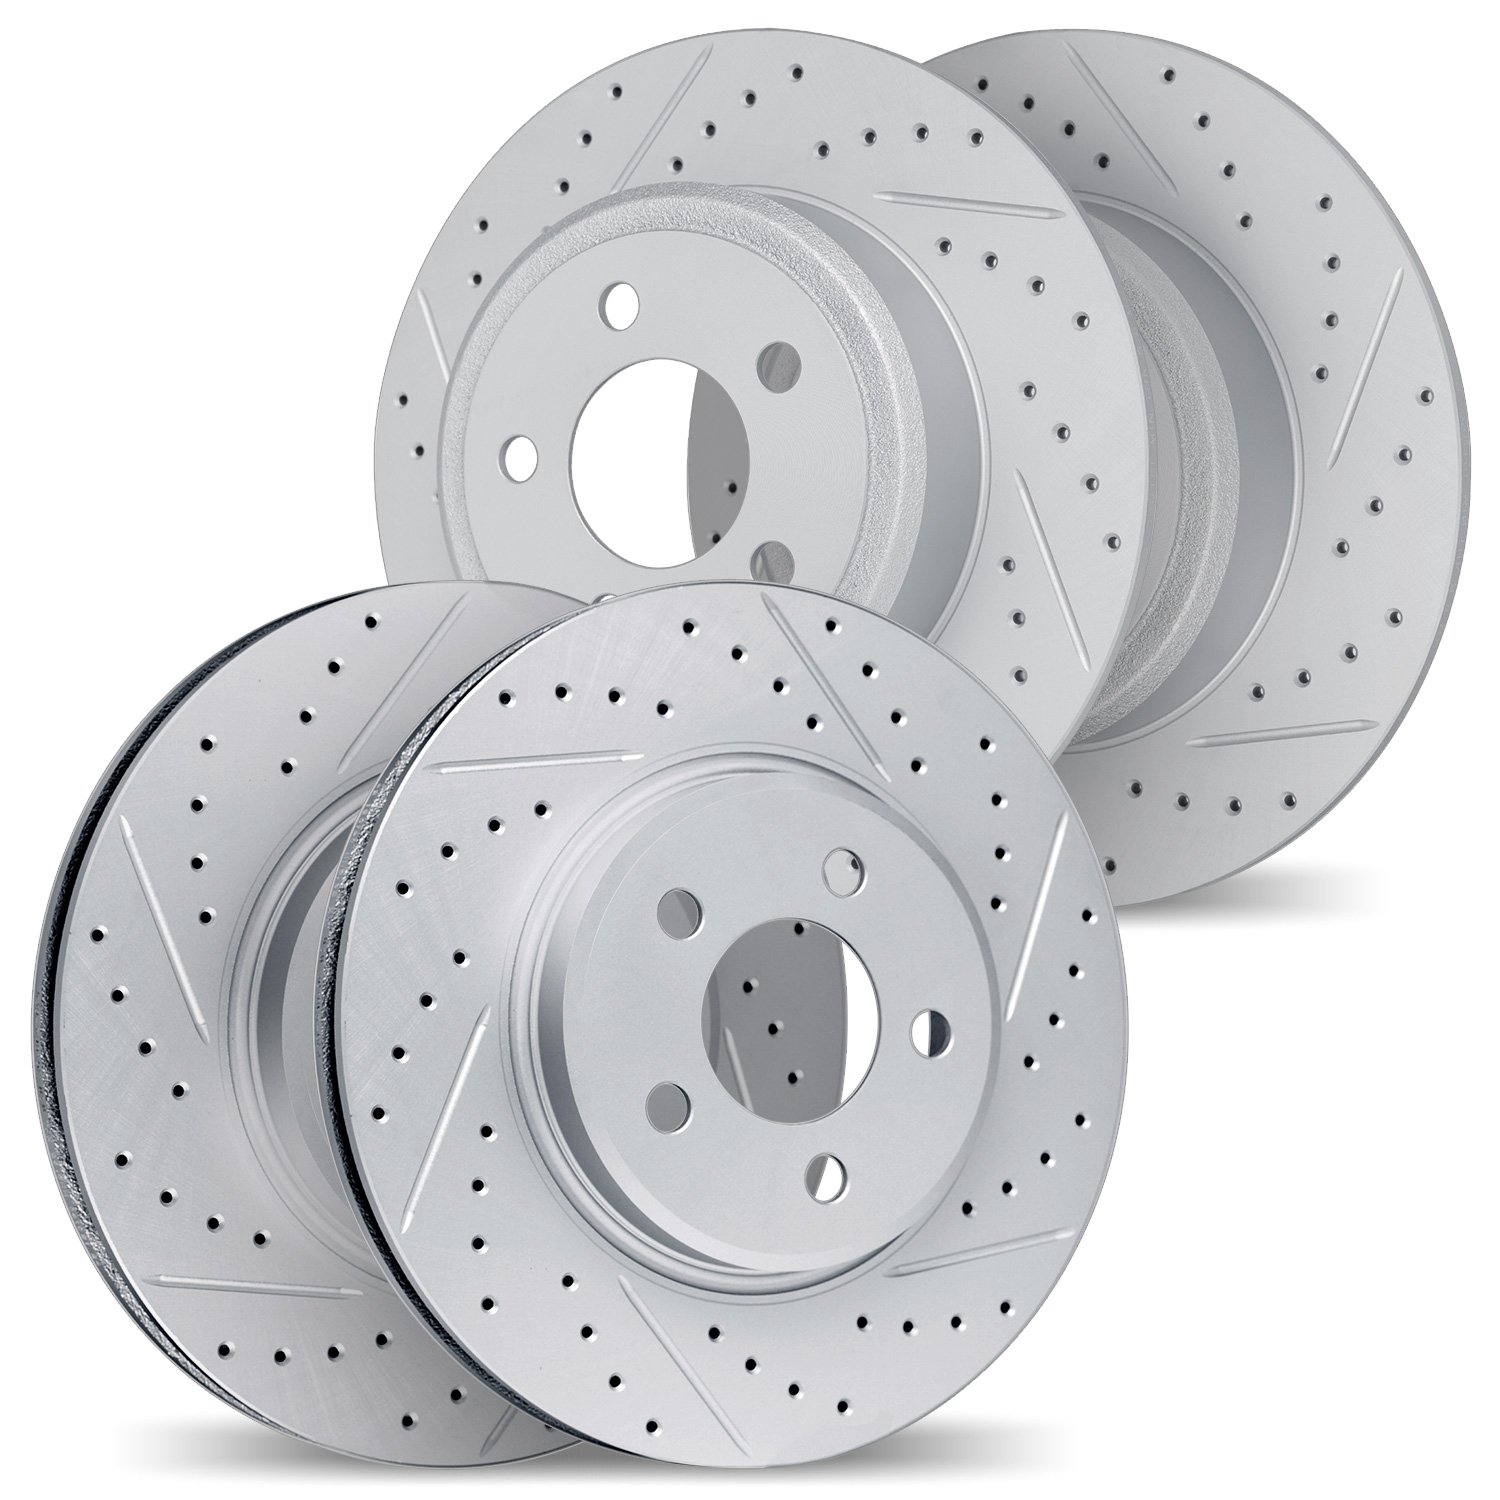 2004-03033 Geoperformance Drilled/Slotted Brake Rotors, Fits Select Kia/Hyundai/Genesis, Position: Front and Rear